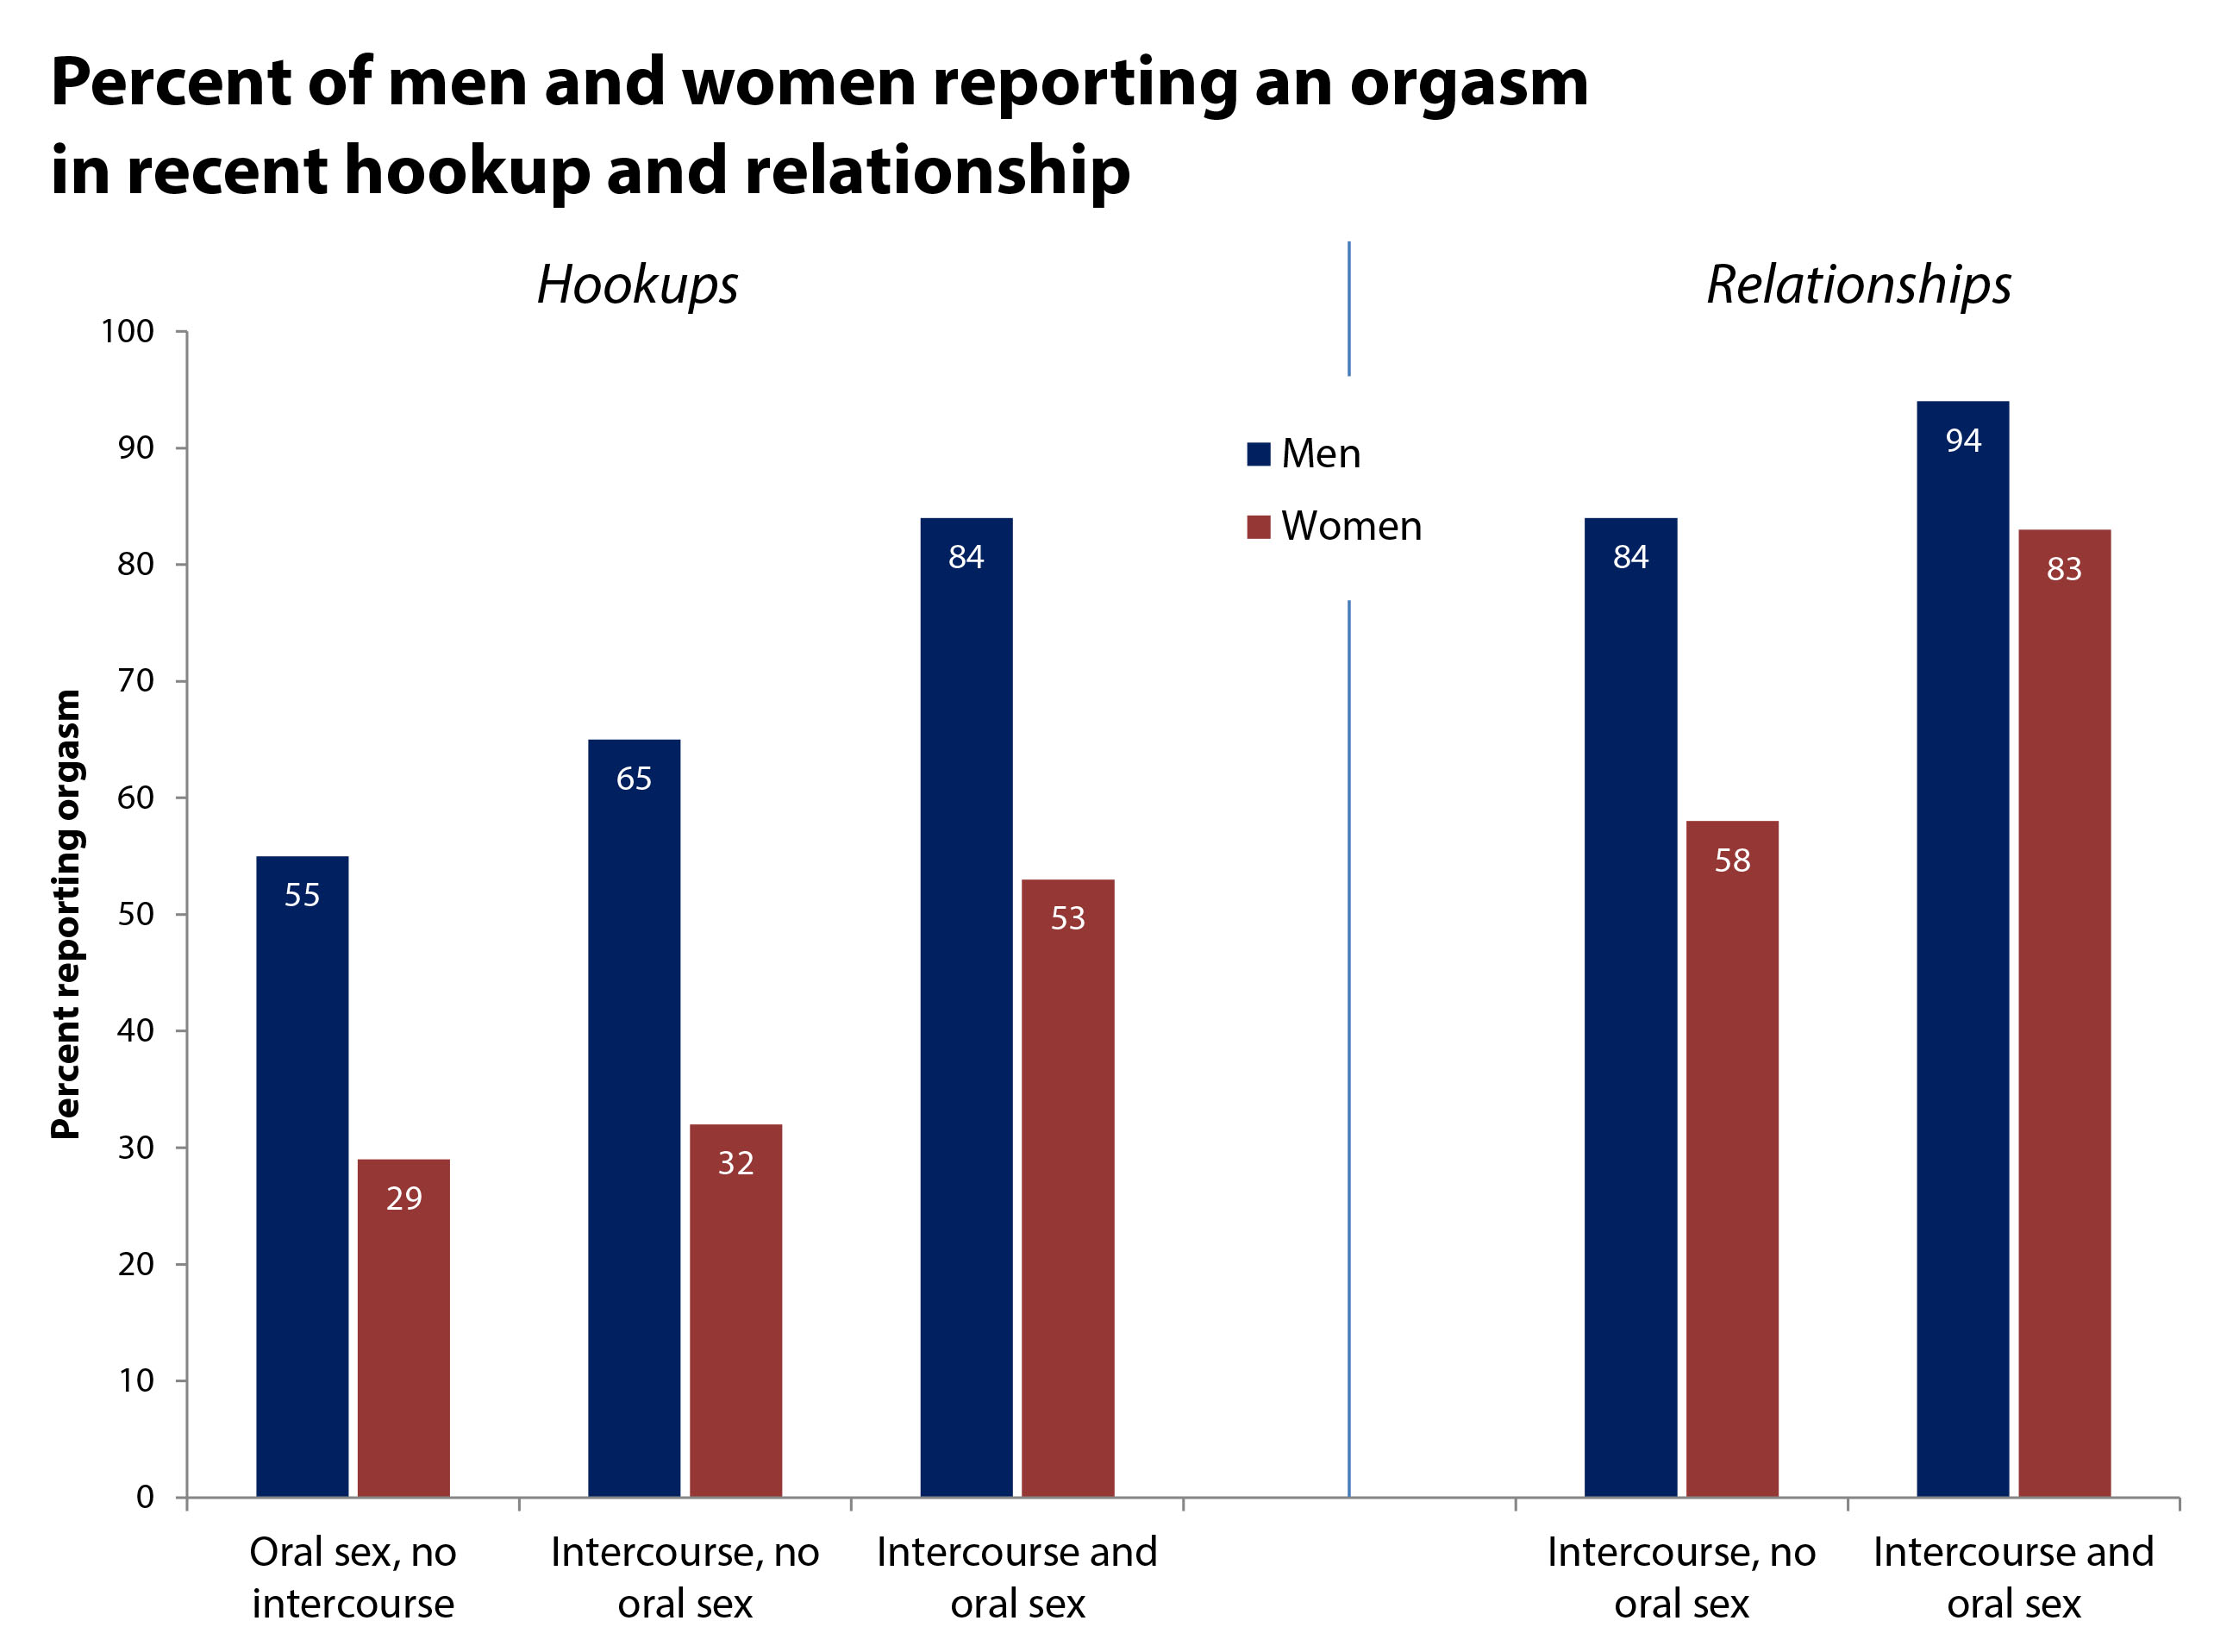 Note: Oral sex refers to whether the student reporting on his or her own orgasm received oral sex. Data limited to students identifying as heterosexual in male/female events.